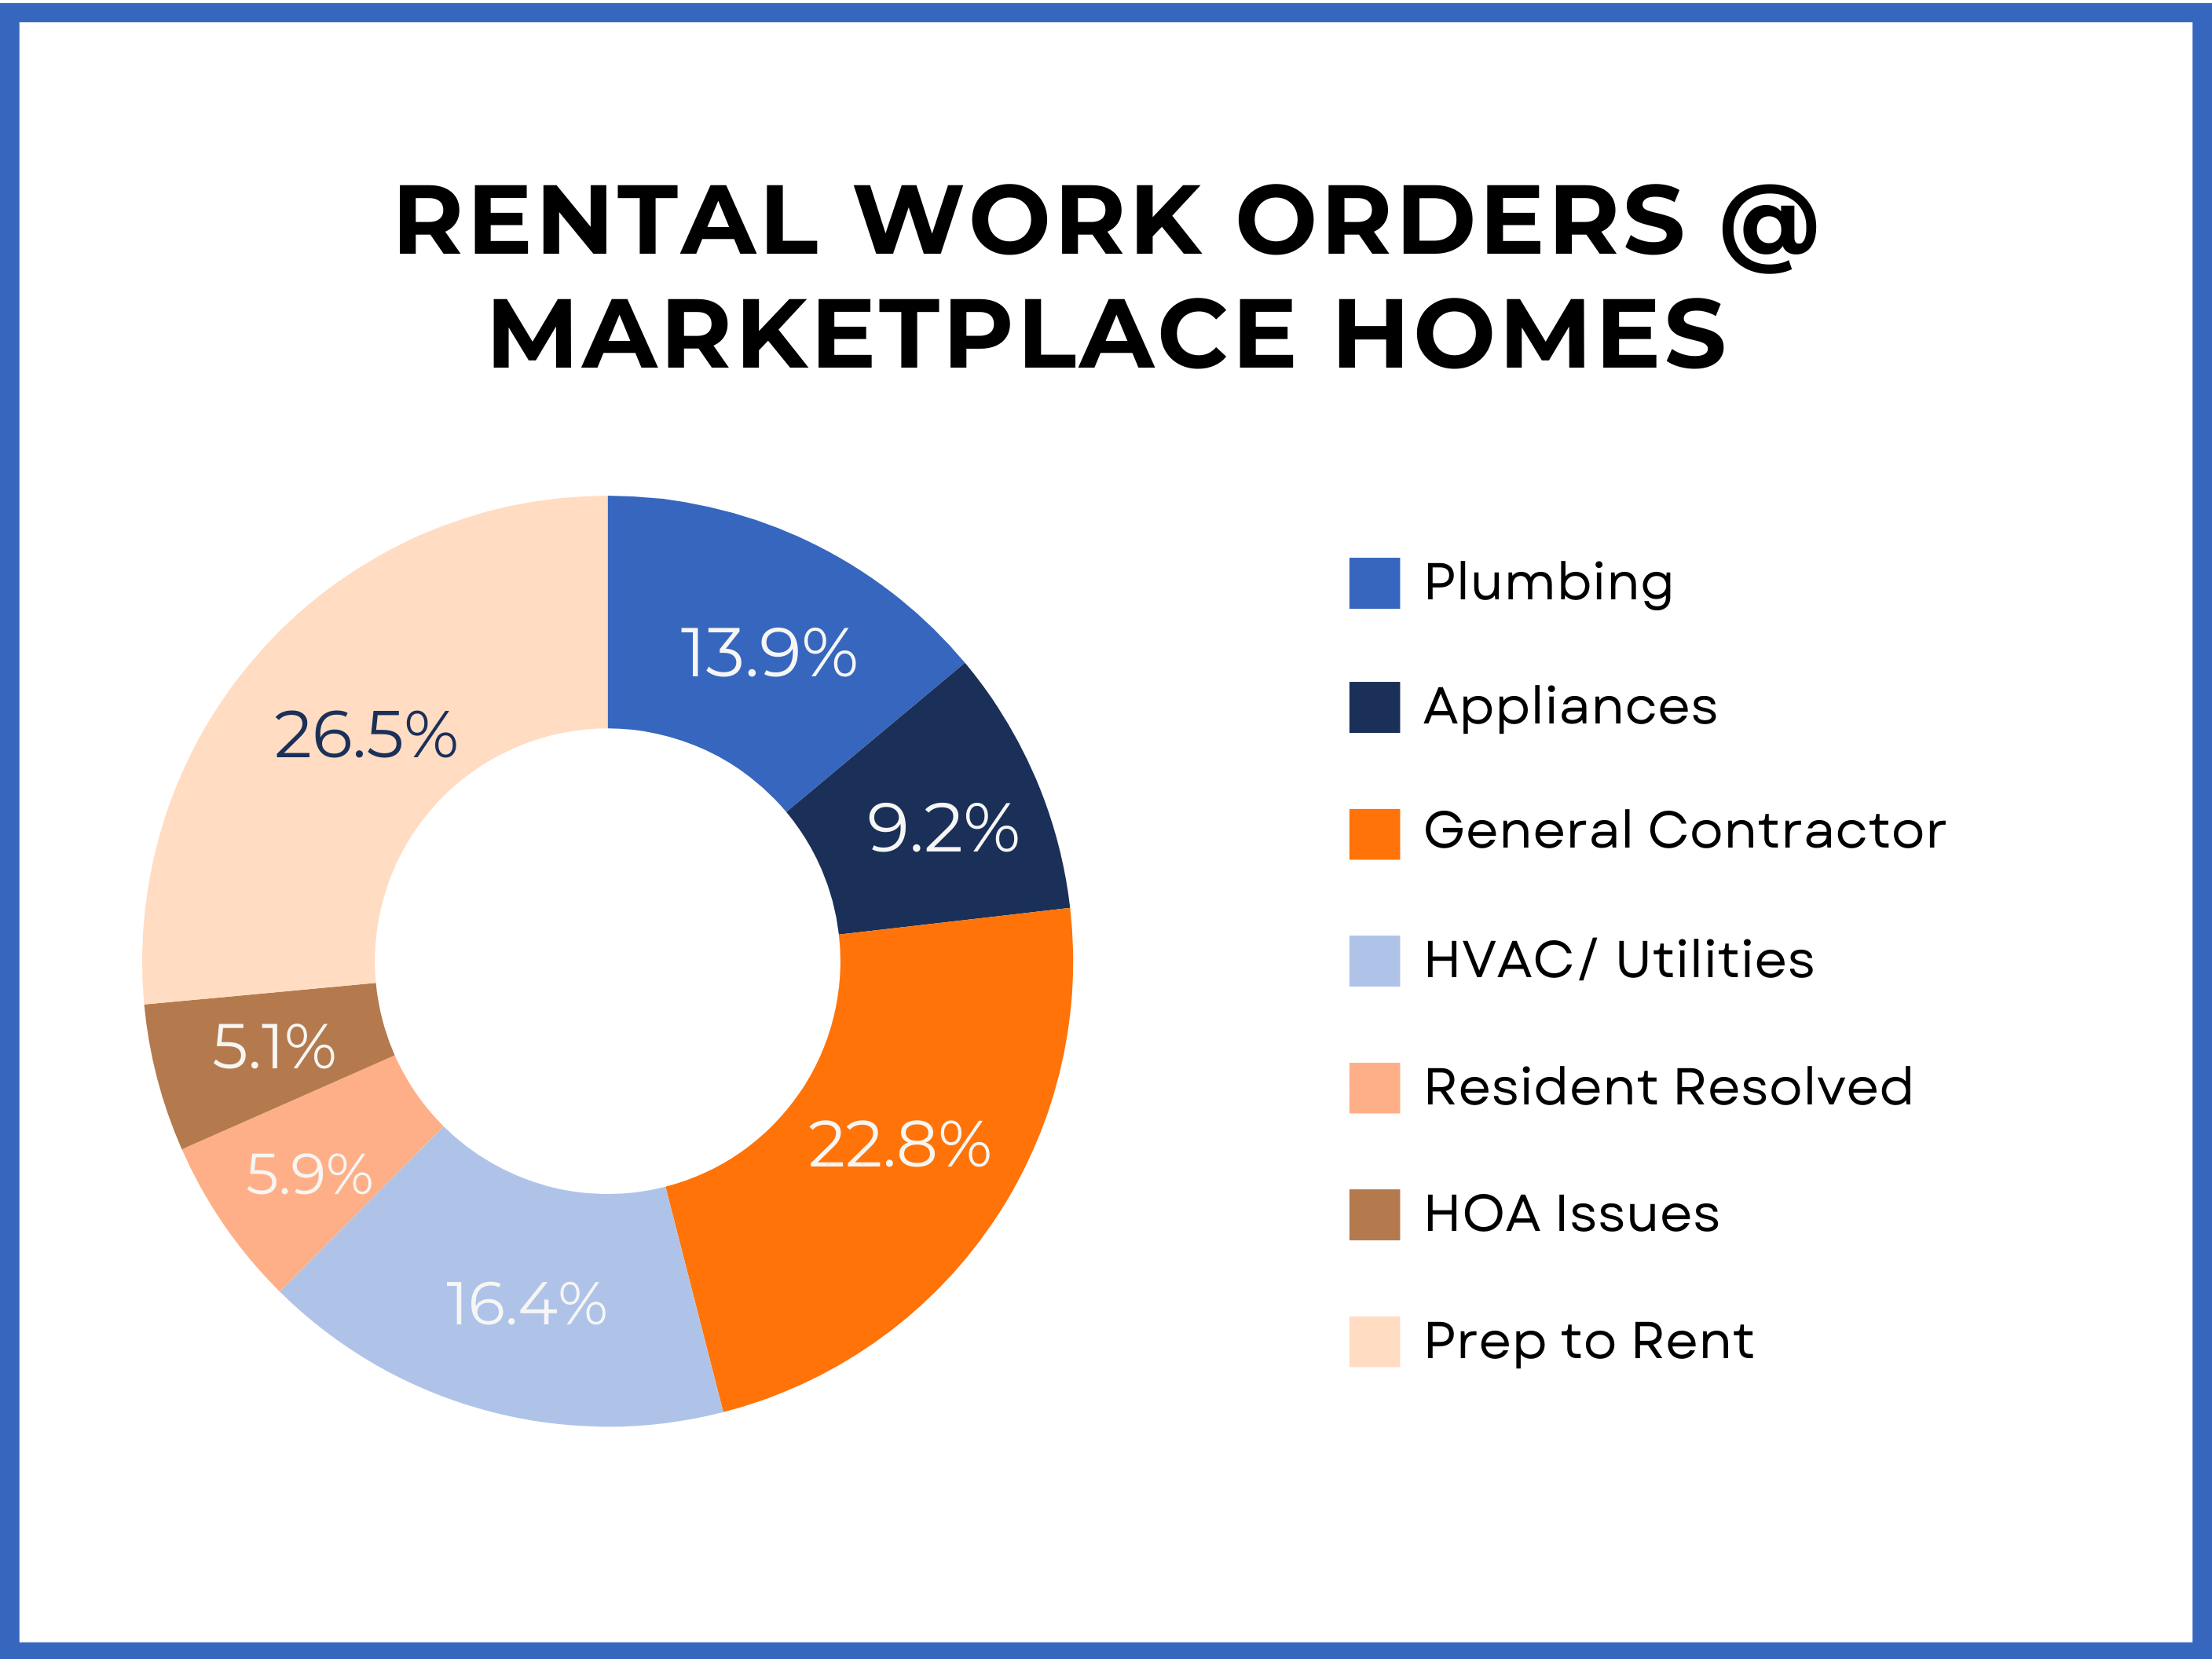 pie chart showing the most common rental work orders